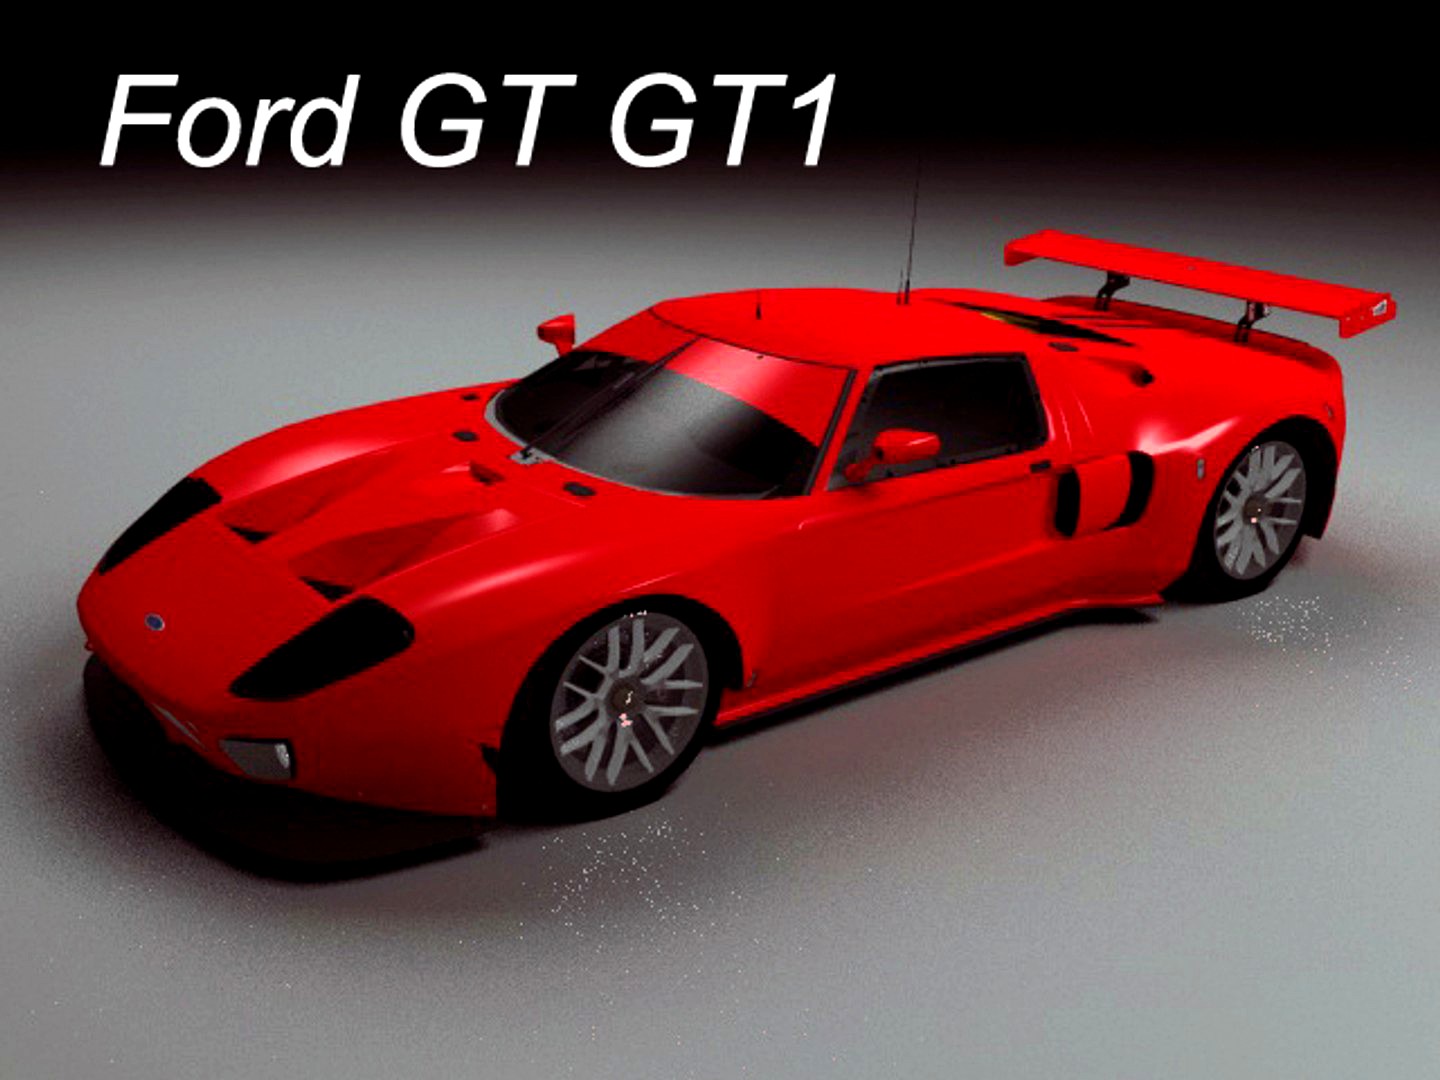 Ford GT GT1